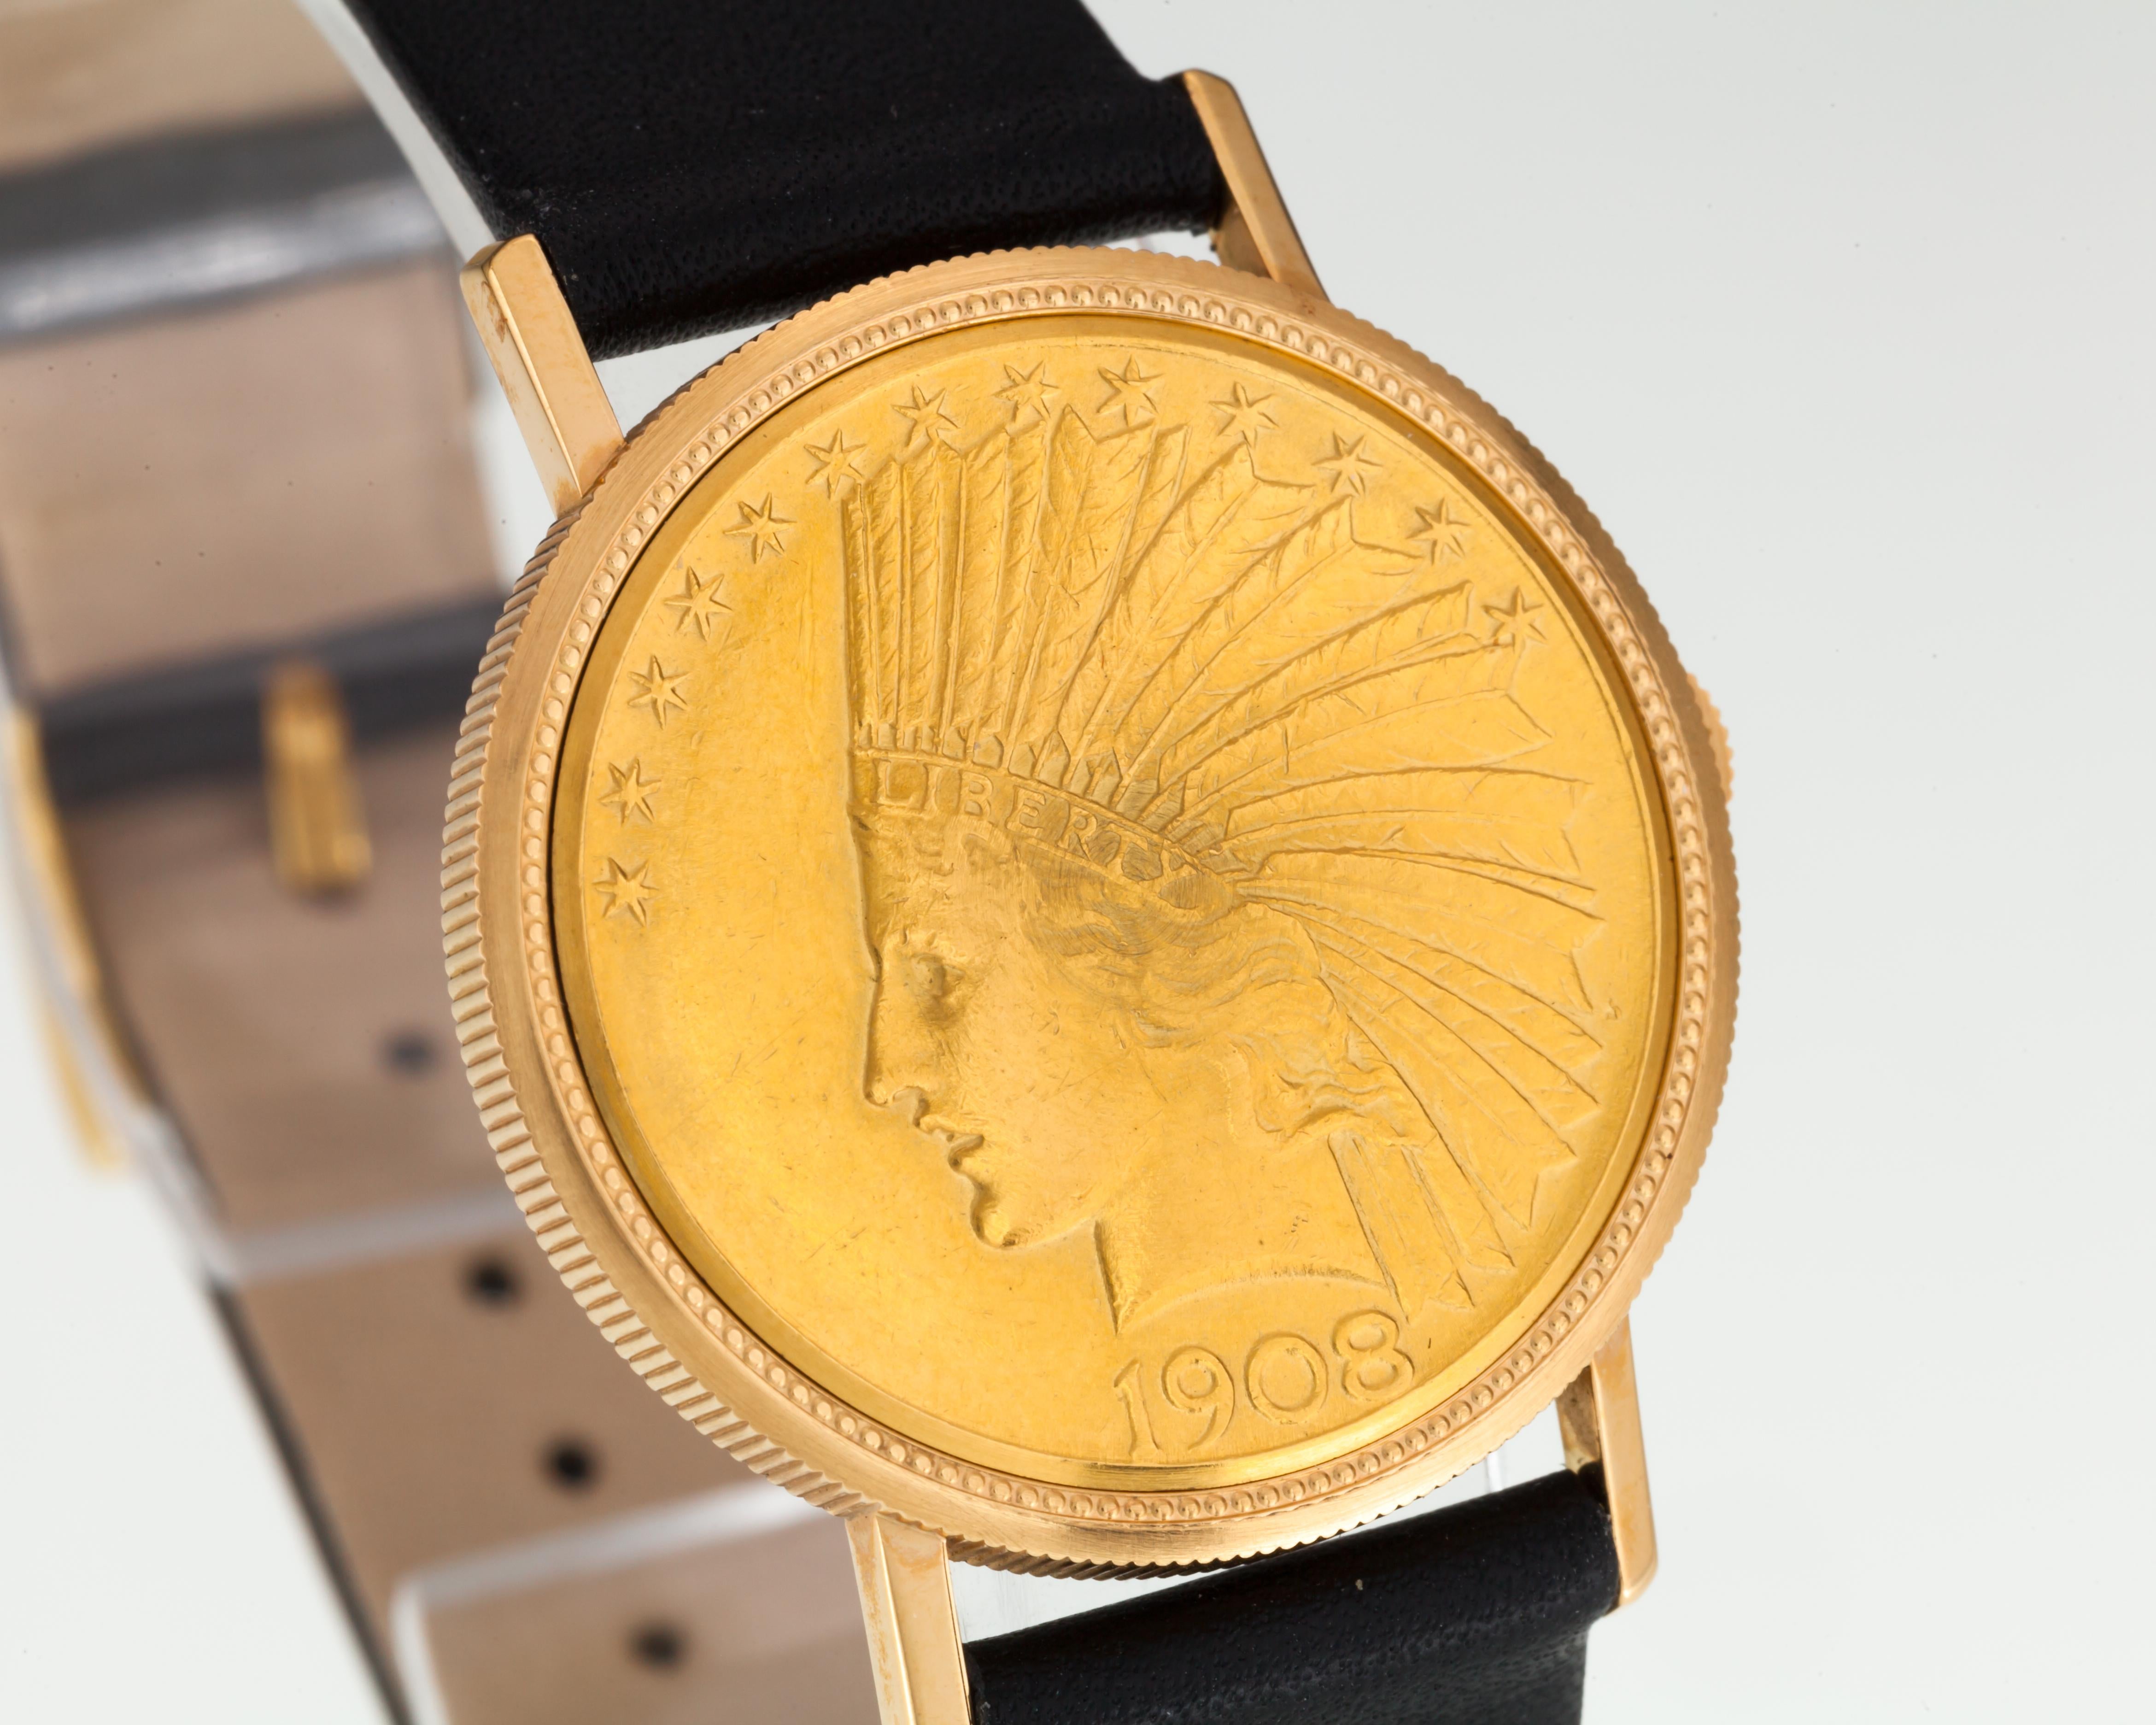 18k Yellow Gold Case w/ 1908 $10 Gold Indian Eagle Coin Front and Back Cover
30 mm in Diameter
Lug-to-Lug Width = 16 mm
Lug-to-Lug Distance = 37 mm
Thickness = 5 mm

Leuba Louis Geneve Thin Hinged Movement and Dial
19 mm in Diameter
3 mm Thick
In